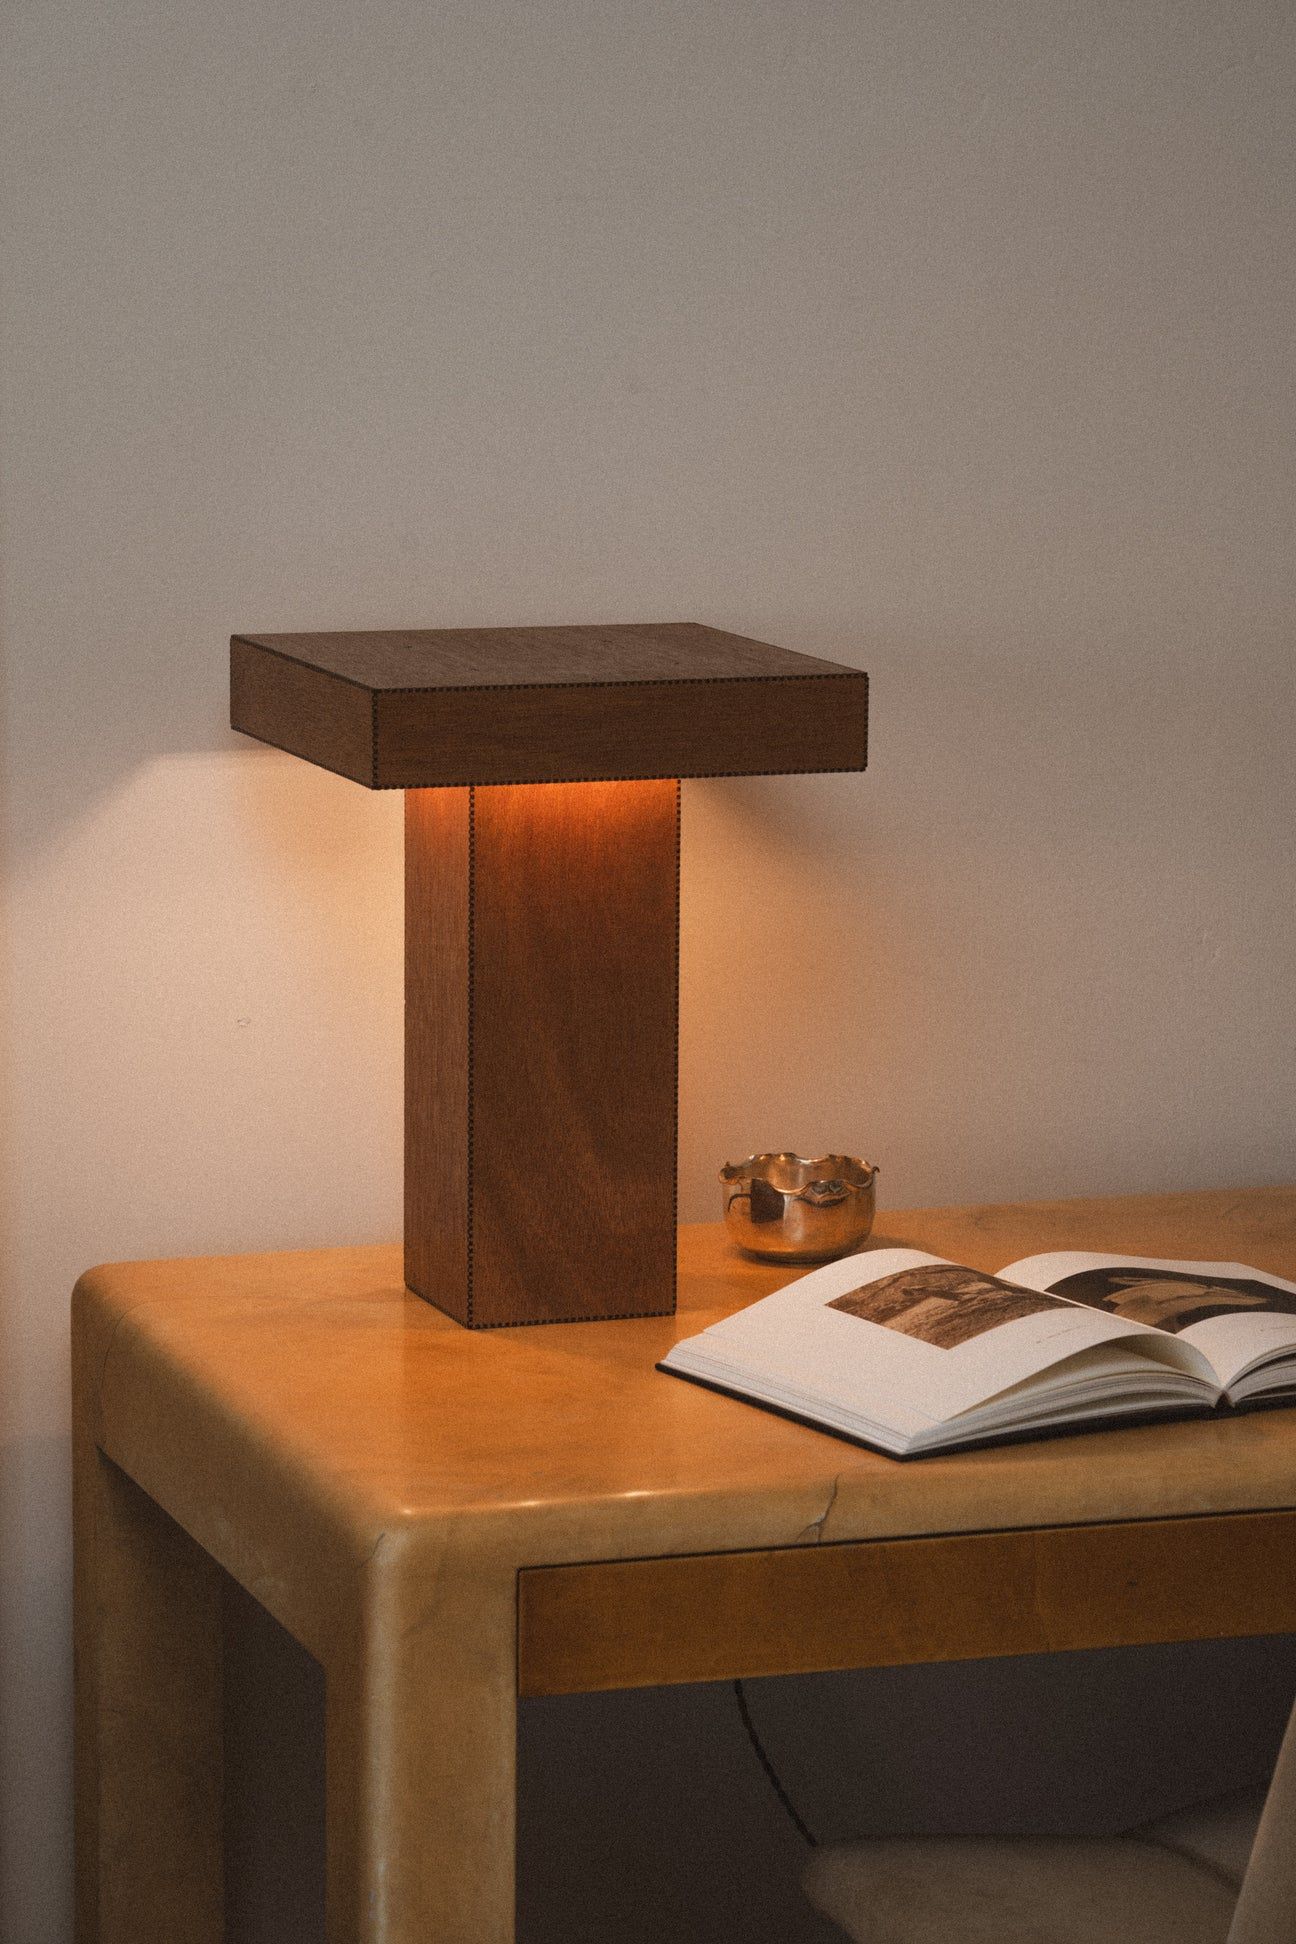 Elegant and Timeless Wooden Table Lamp Designs